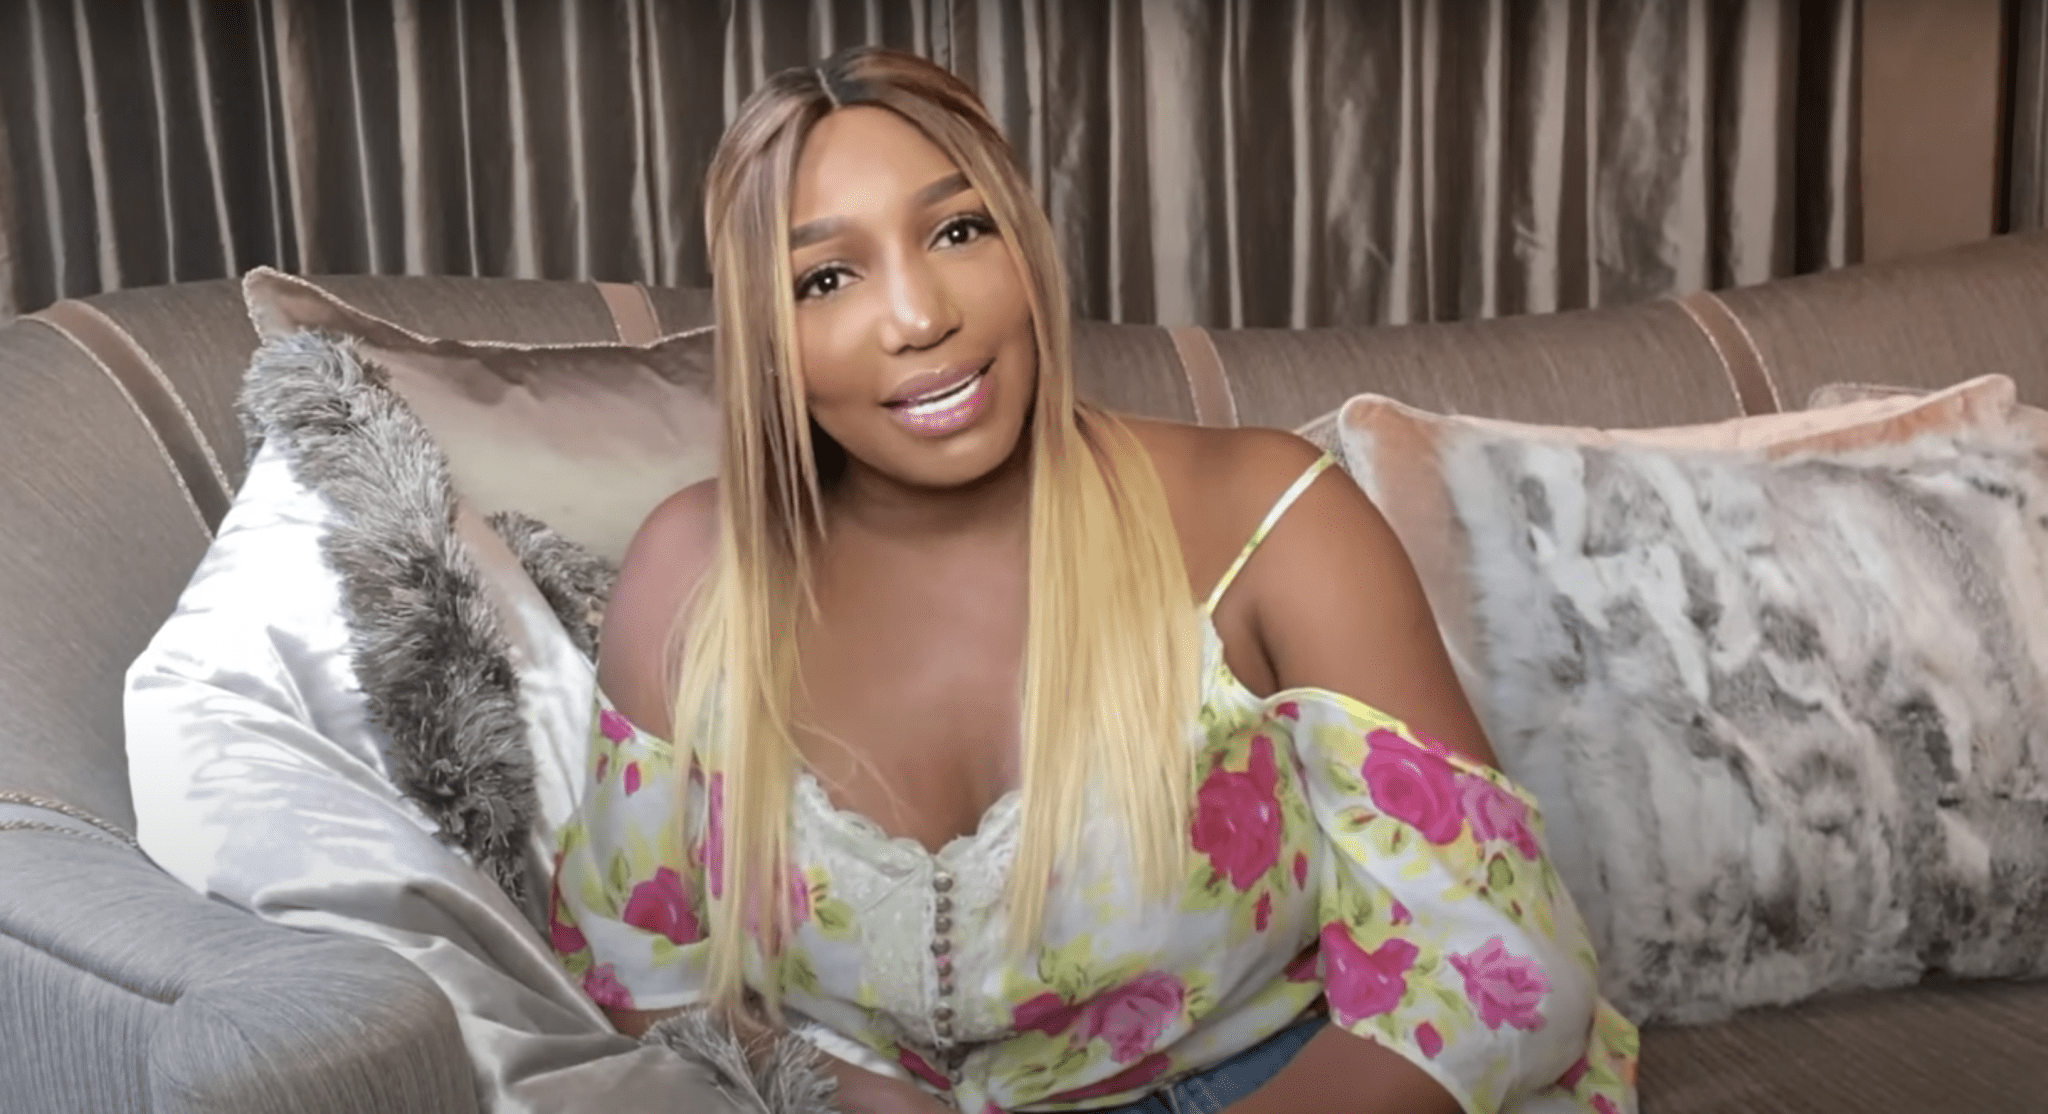 ”nene-leakes-is-grateful-to-everyone-who-touched-her-life”